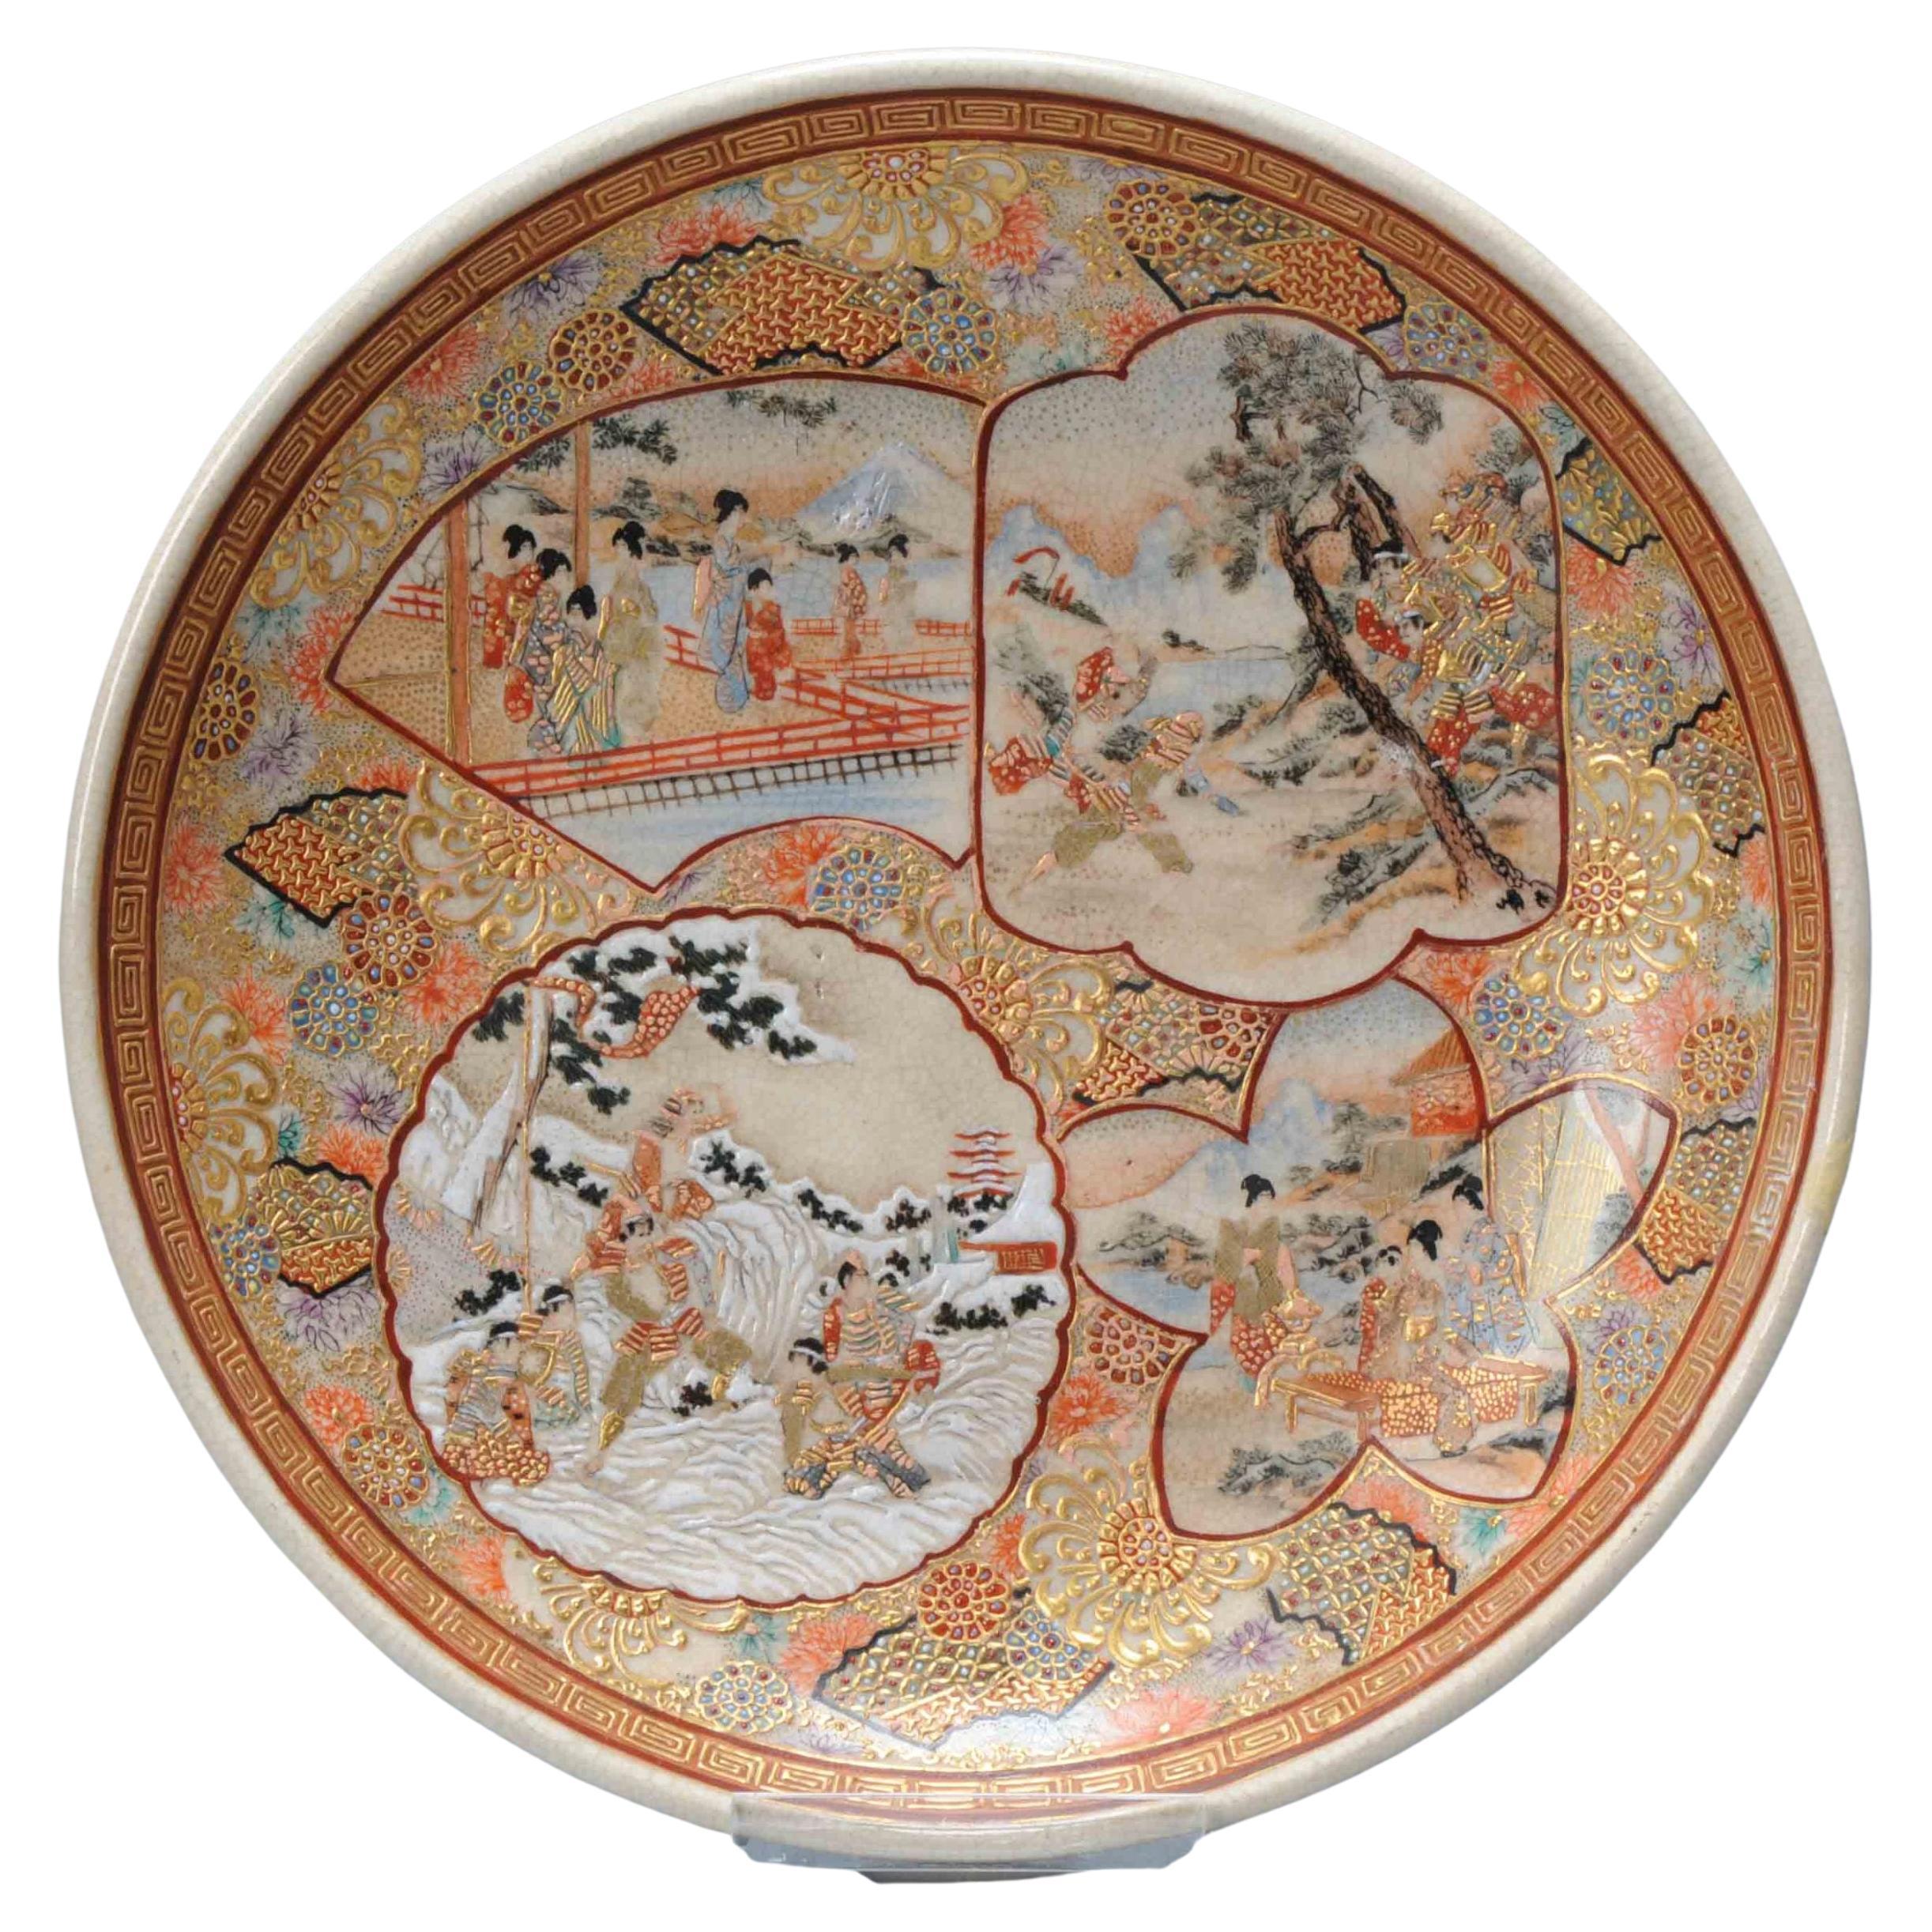 Antique Meiji Period Japanese Satsuma Plate Figures with Mark Japan 19th Century